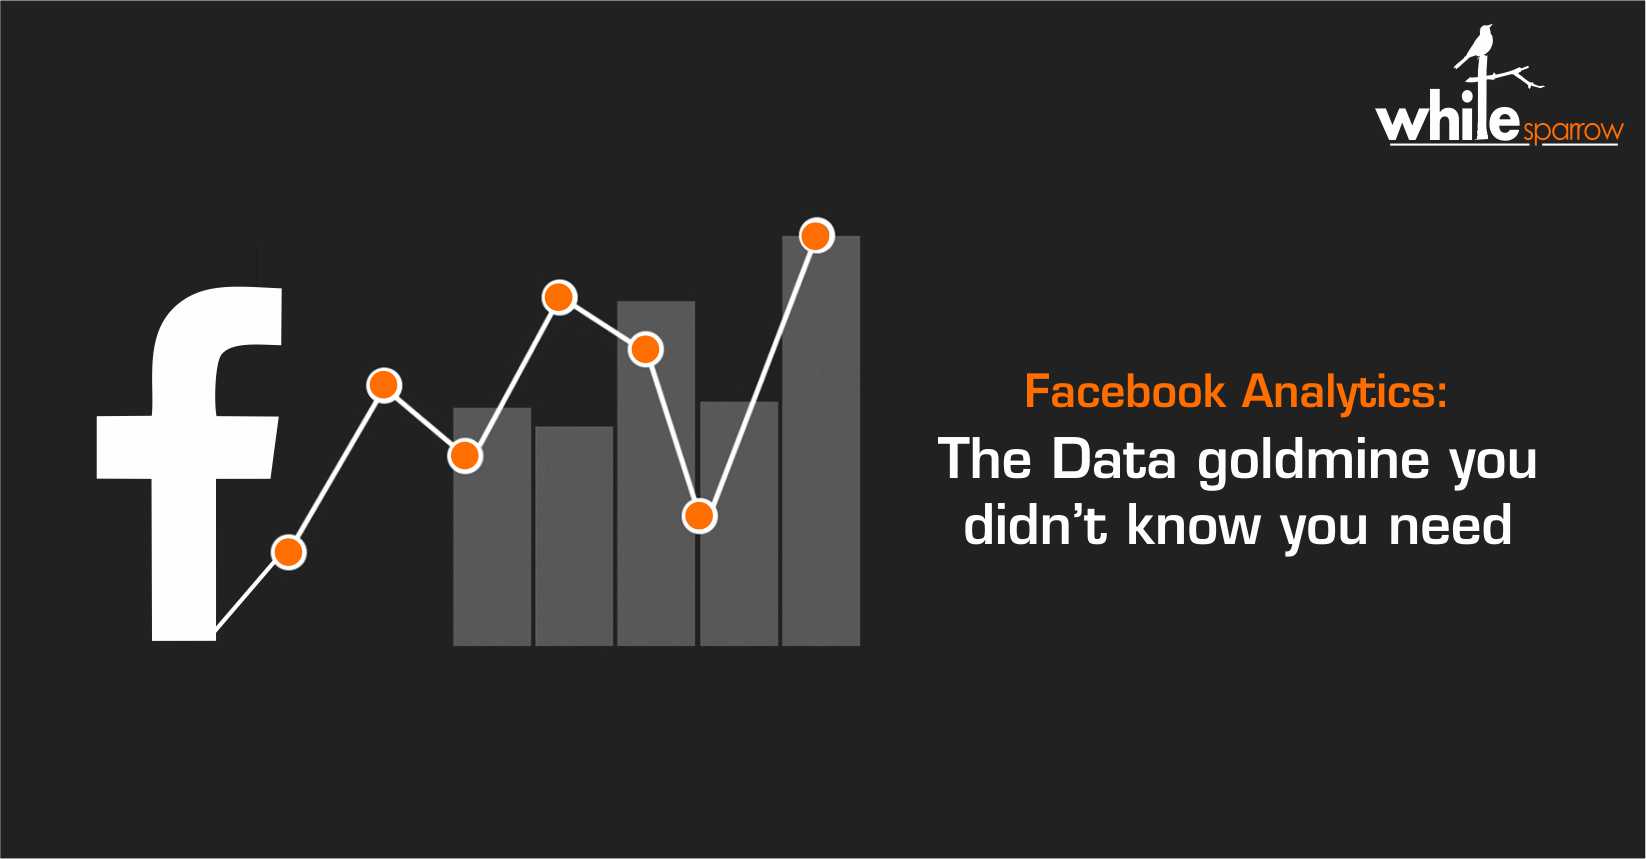 Facebook Analytics: The Data goldmine you didn’t know you need.